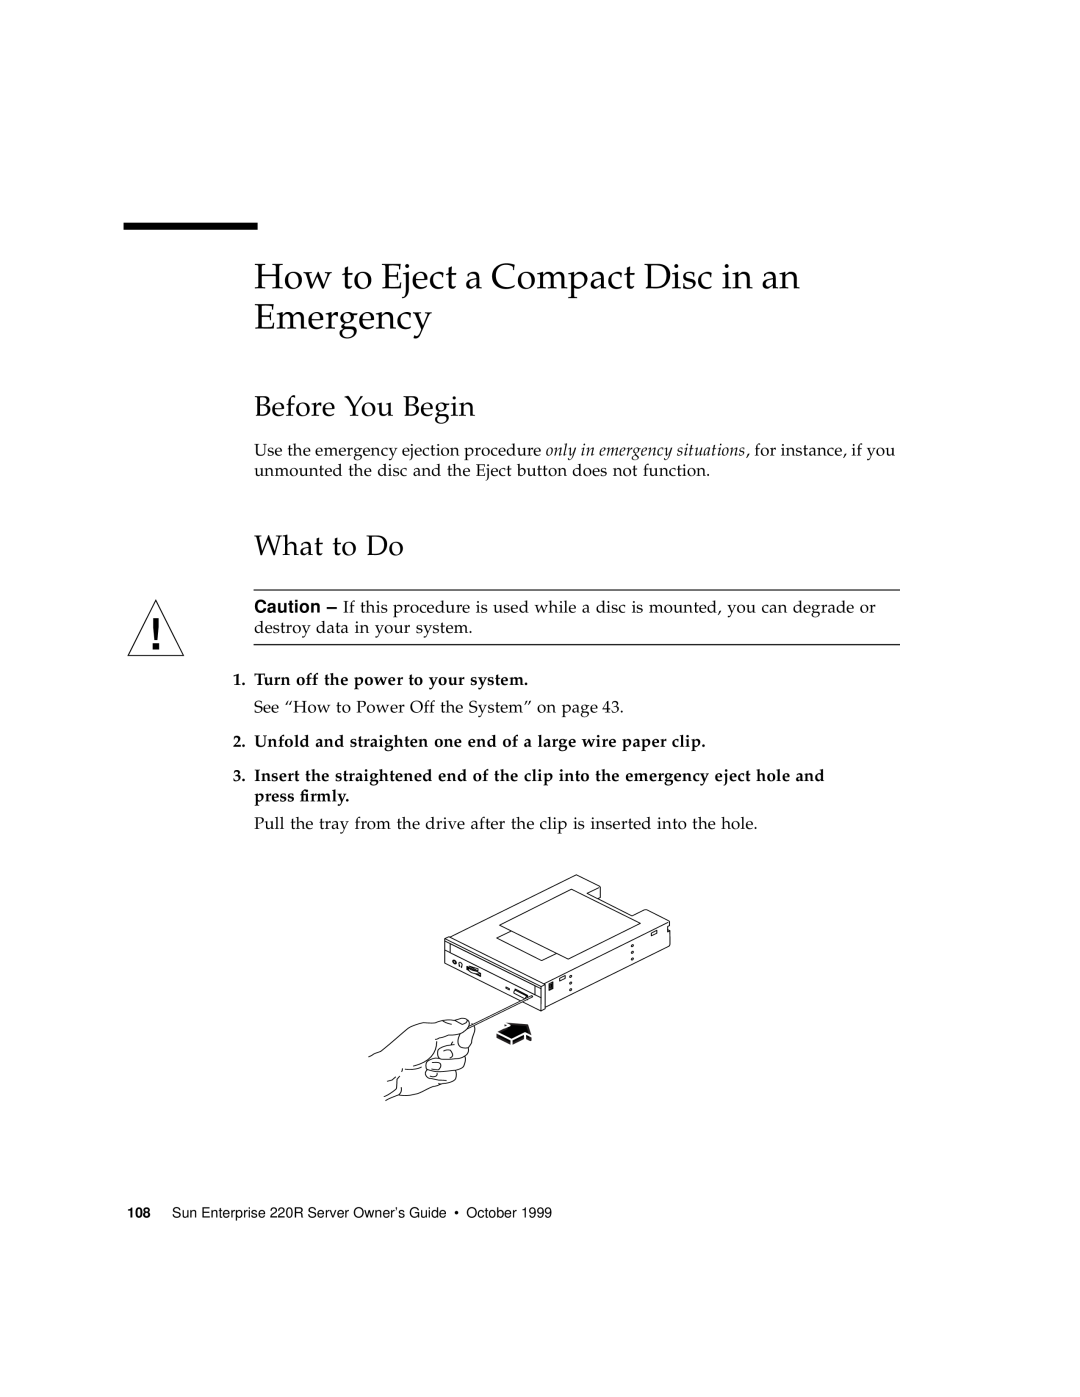 Sun Microsystems 220R How to Eject a Compact Disc in an Emergency, Turn off the power to your system, Before You Begin 